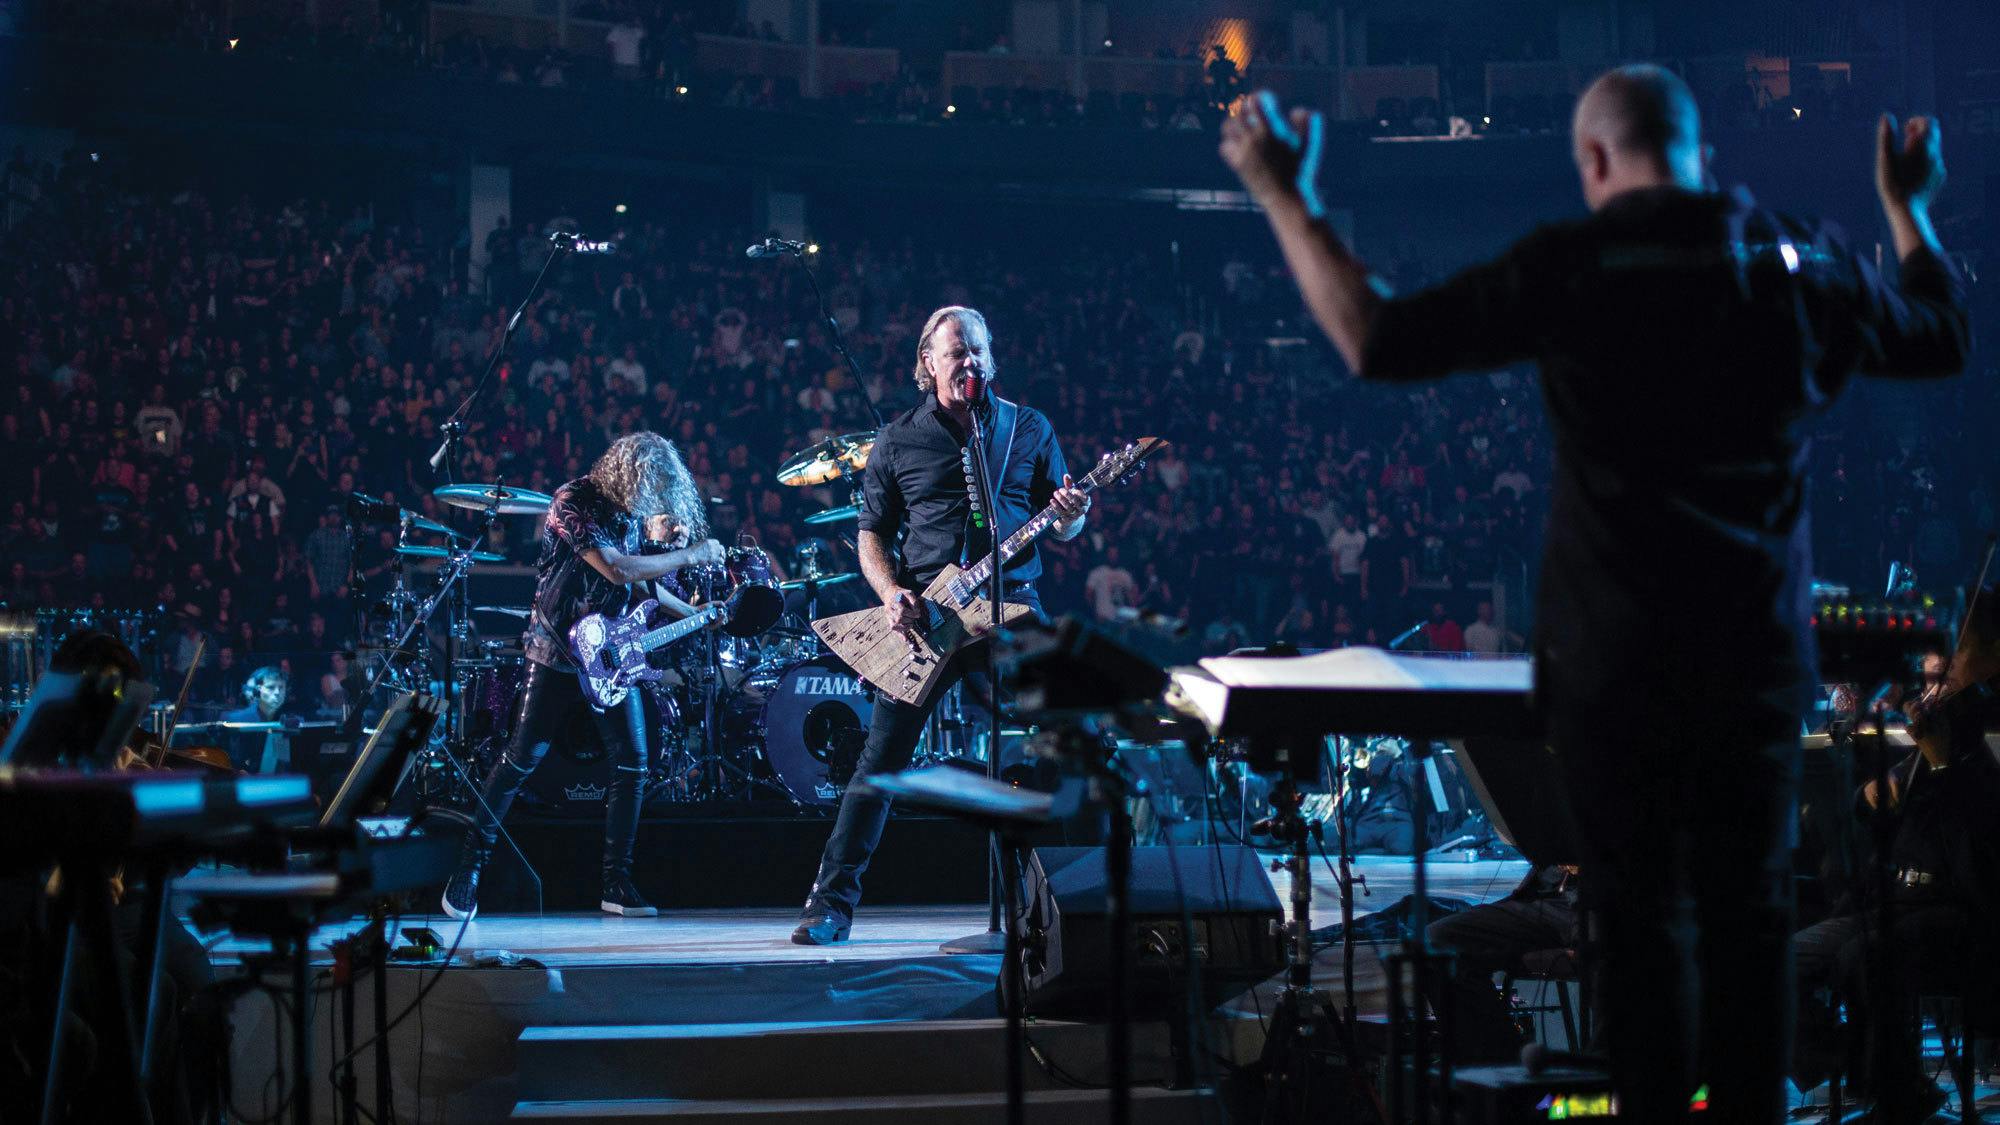 In Pictures: Metallica's S&M2 Show In San Francisco